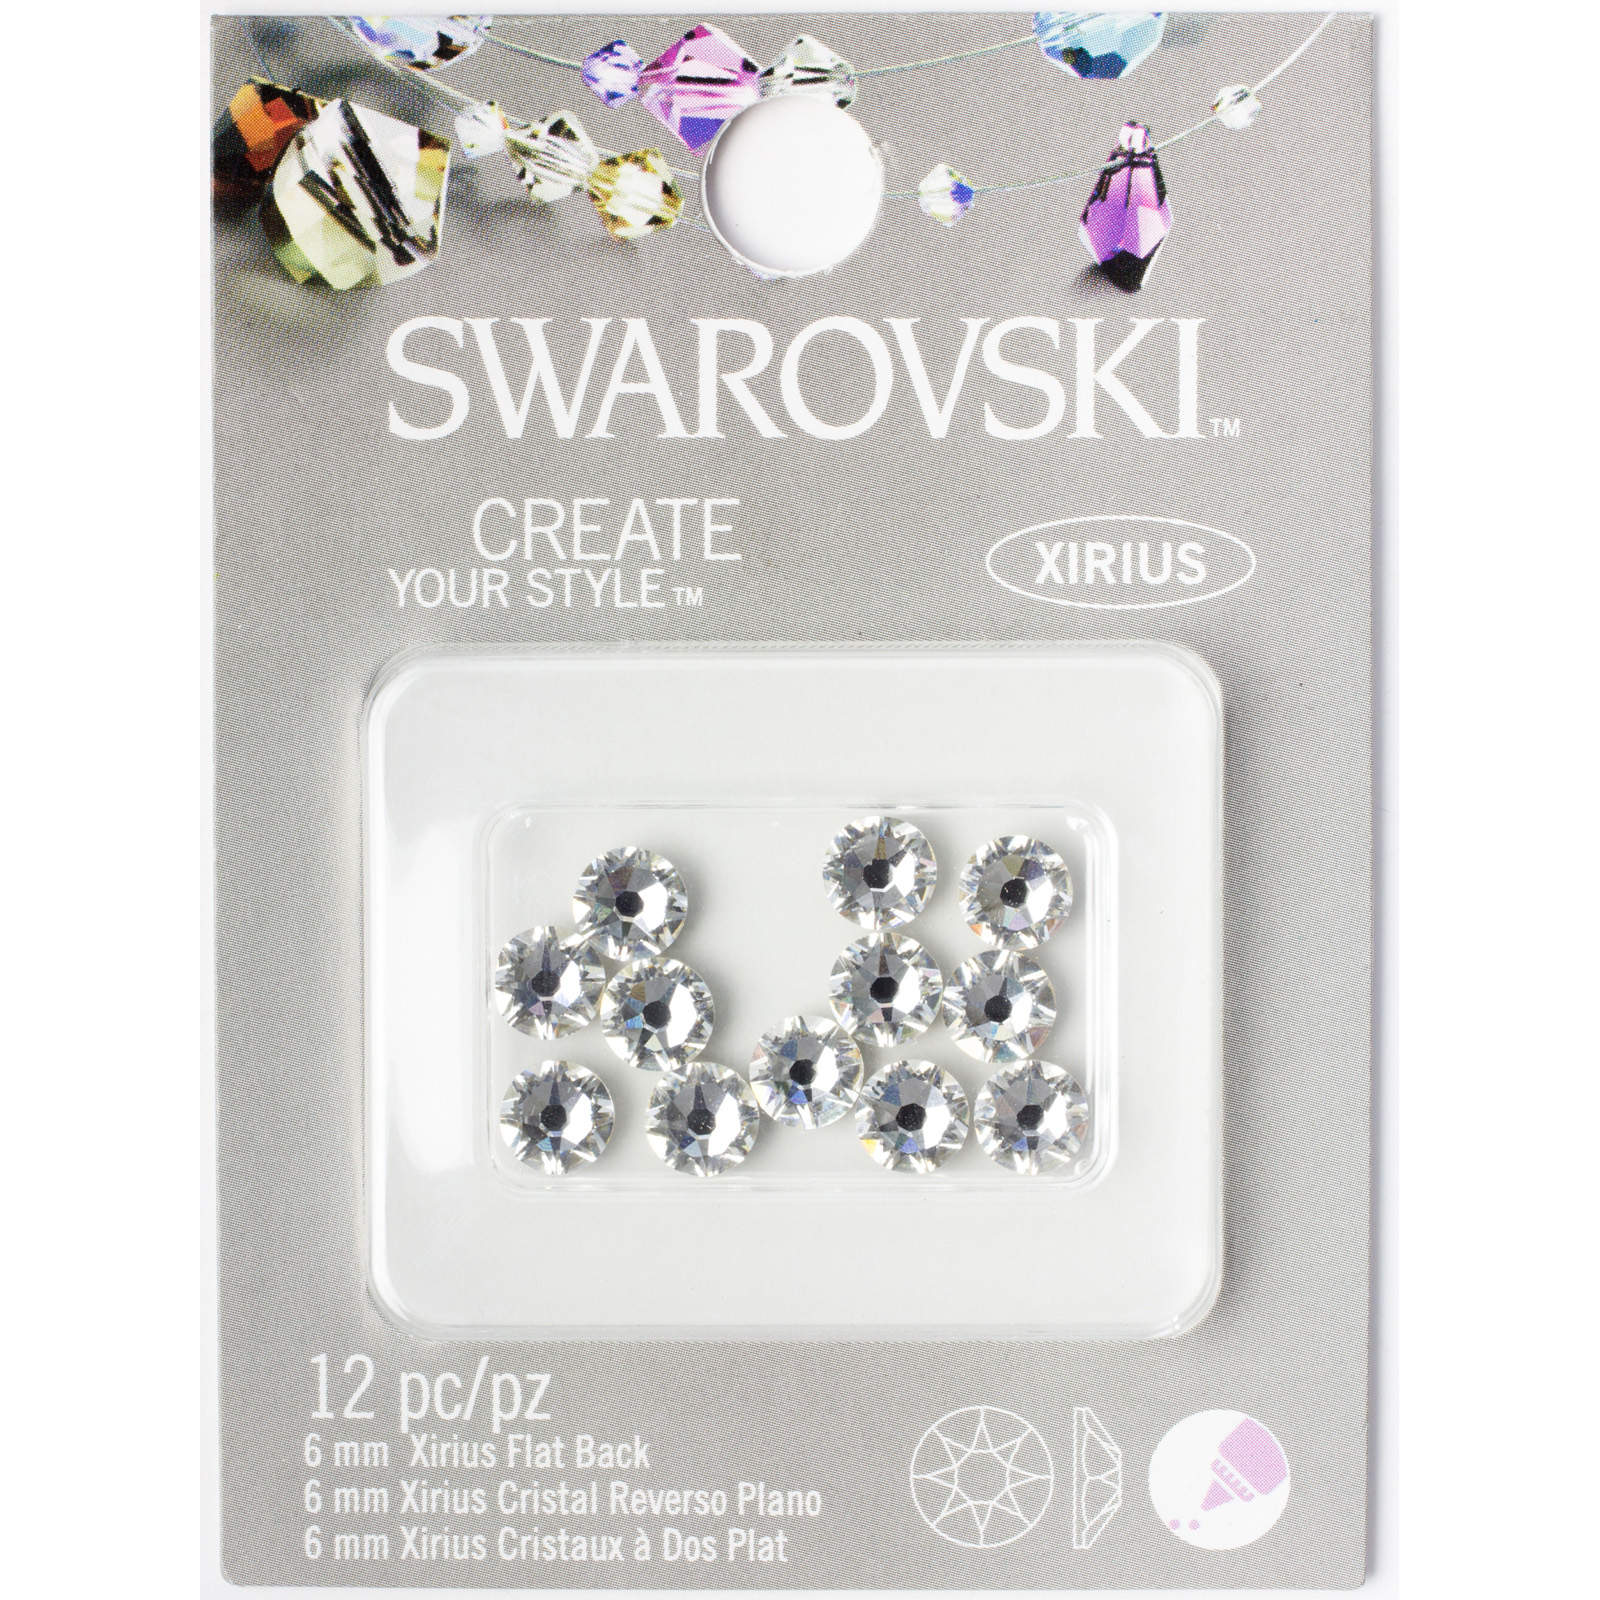 Find the Swarovski™ Create Your Style™ Xirius Flat Back Crystals ...